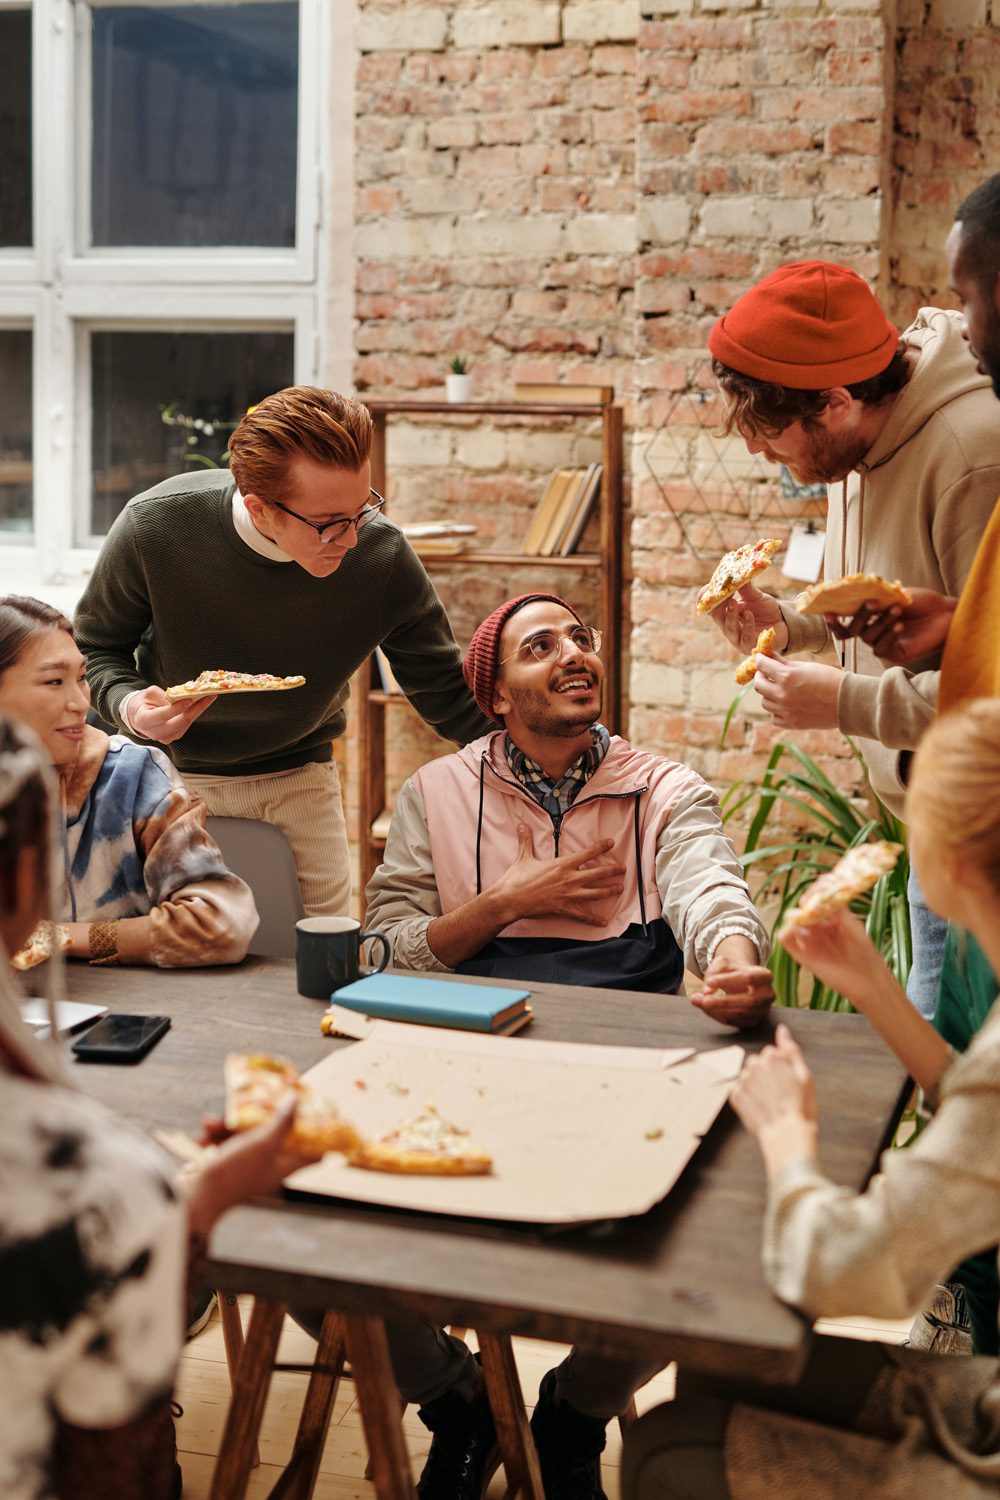 A Group of People Eating Pizza while Having Conversation